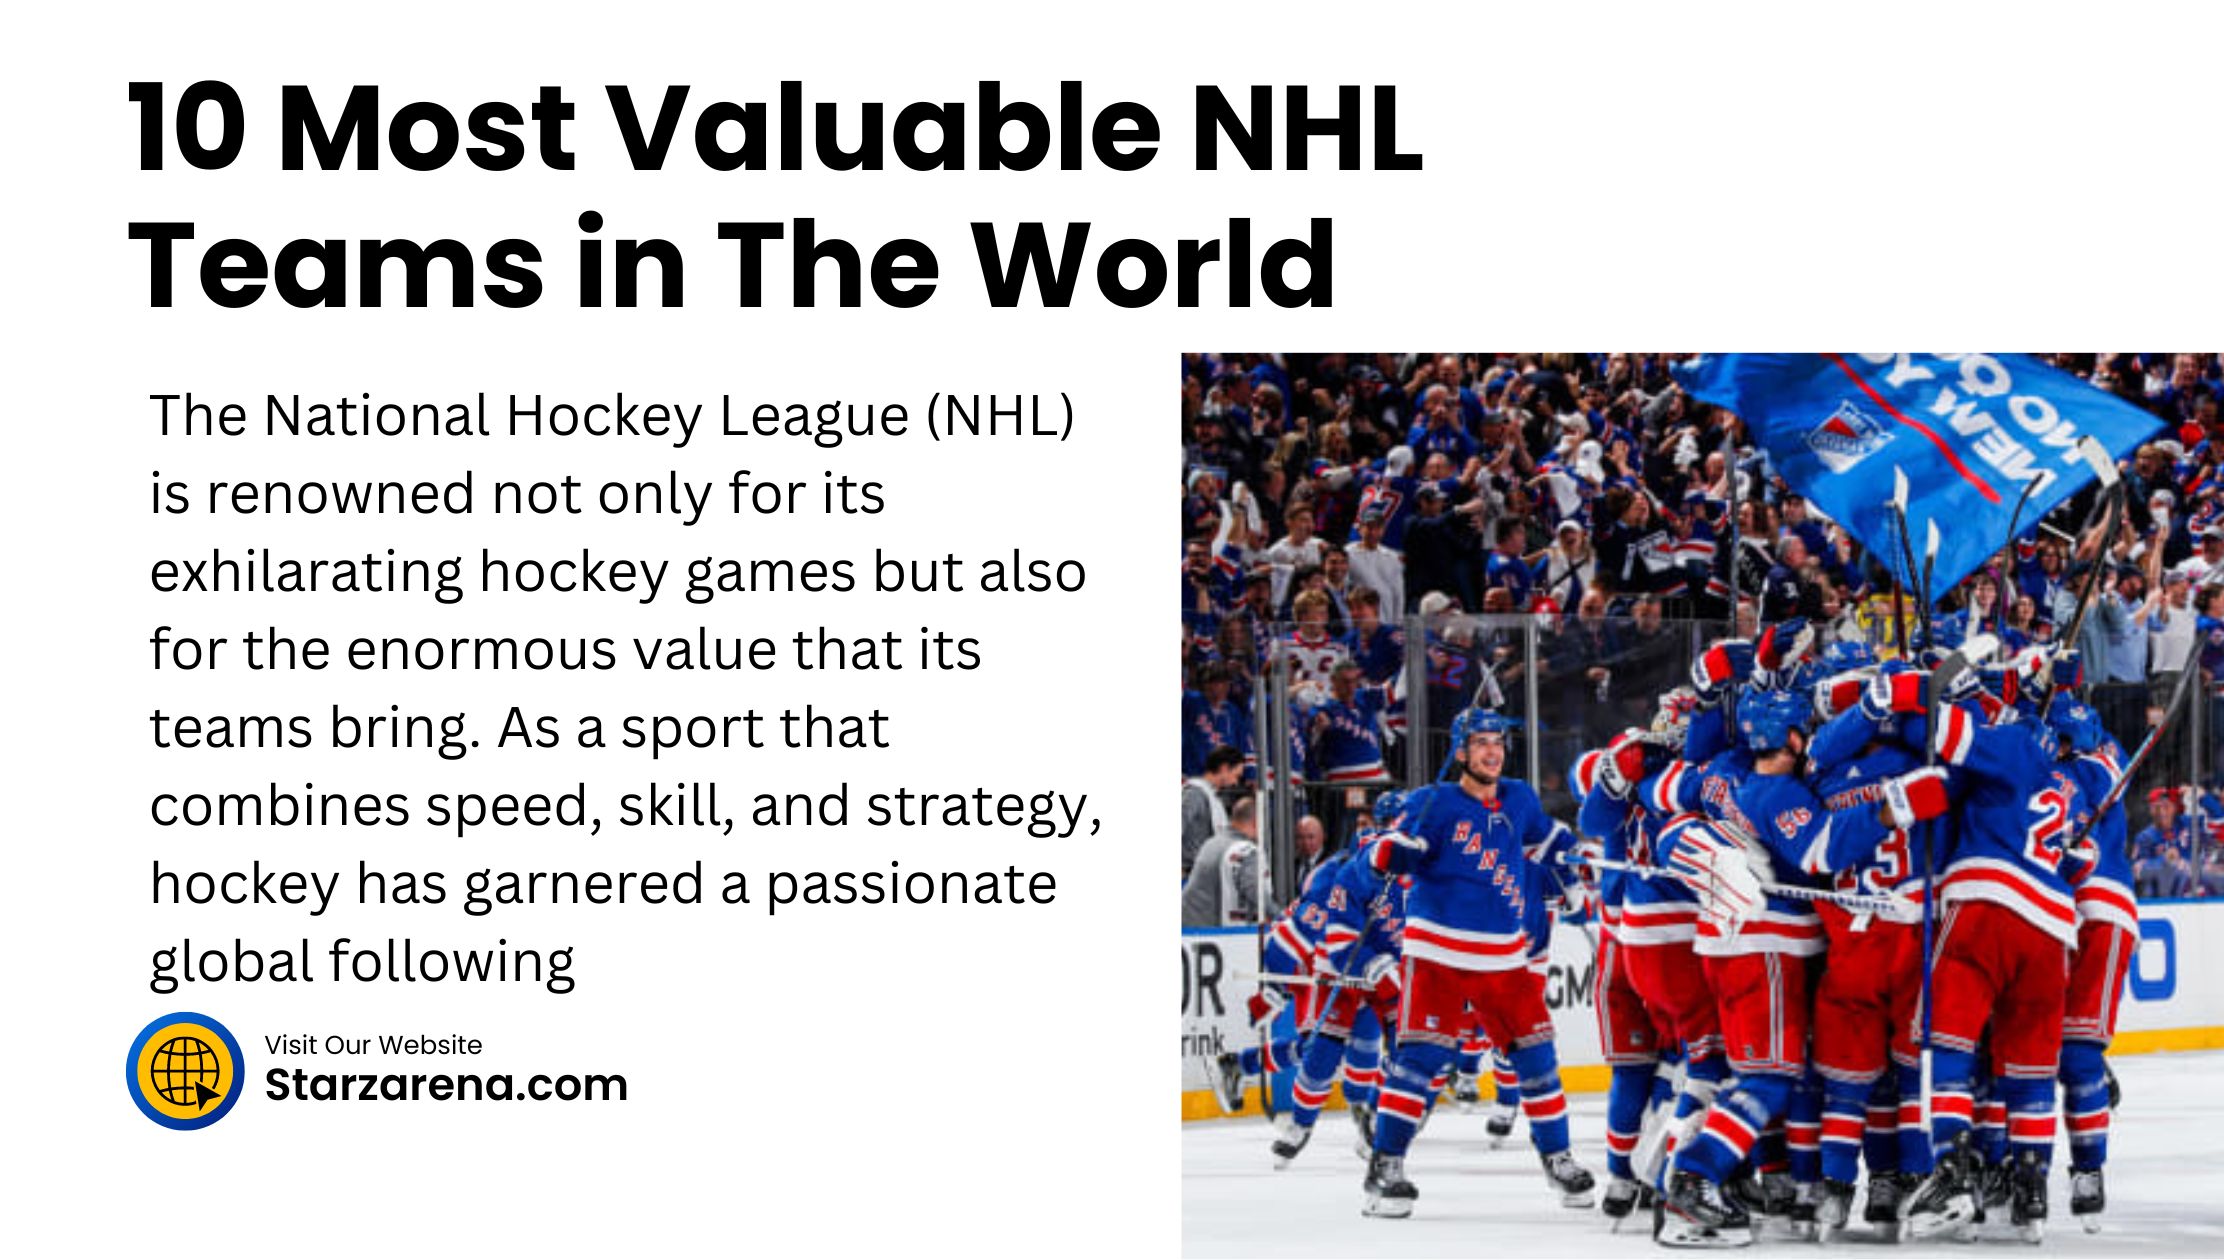 10 Most Valuable NHL Teams